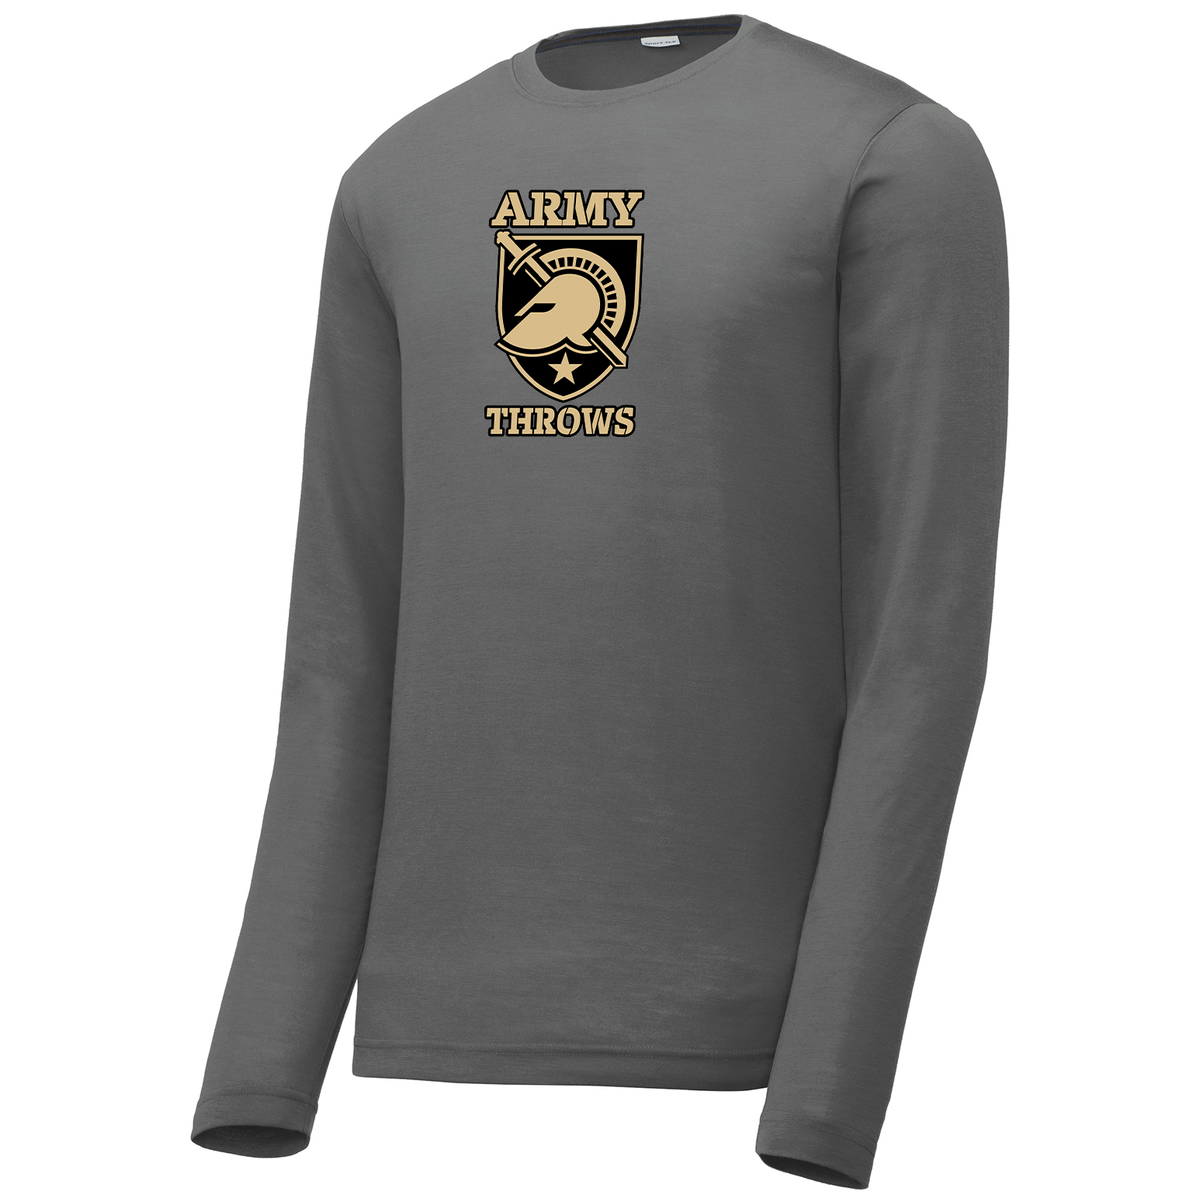 Army Throws Long Sleeve CottonTouch Performance Shirt